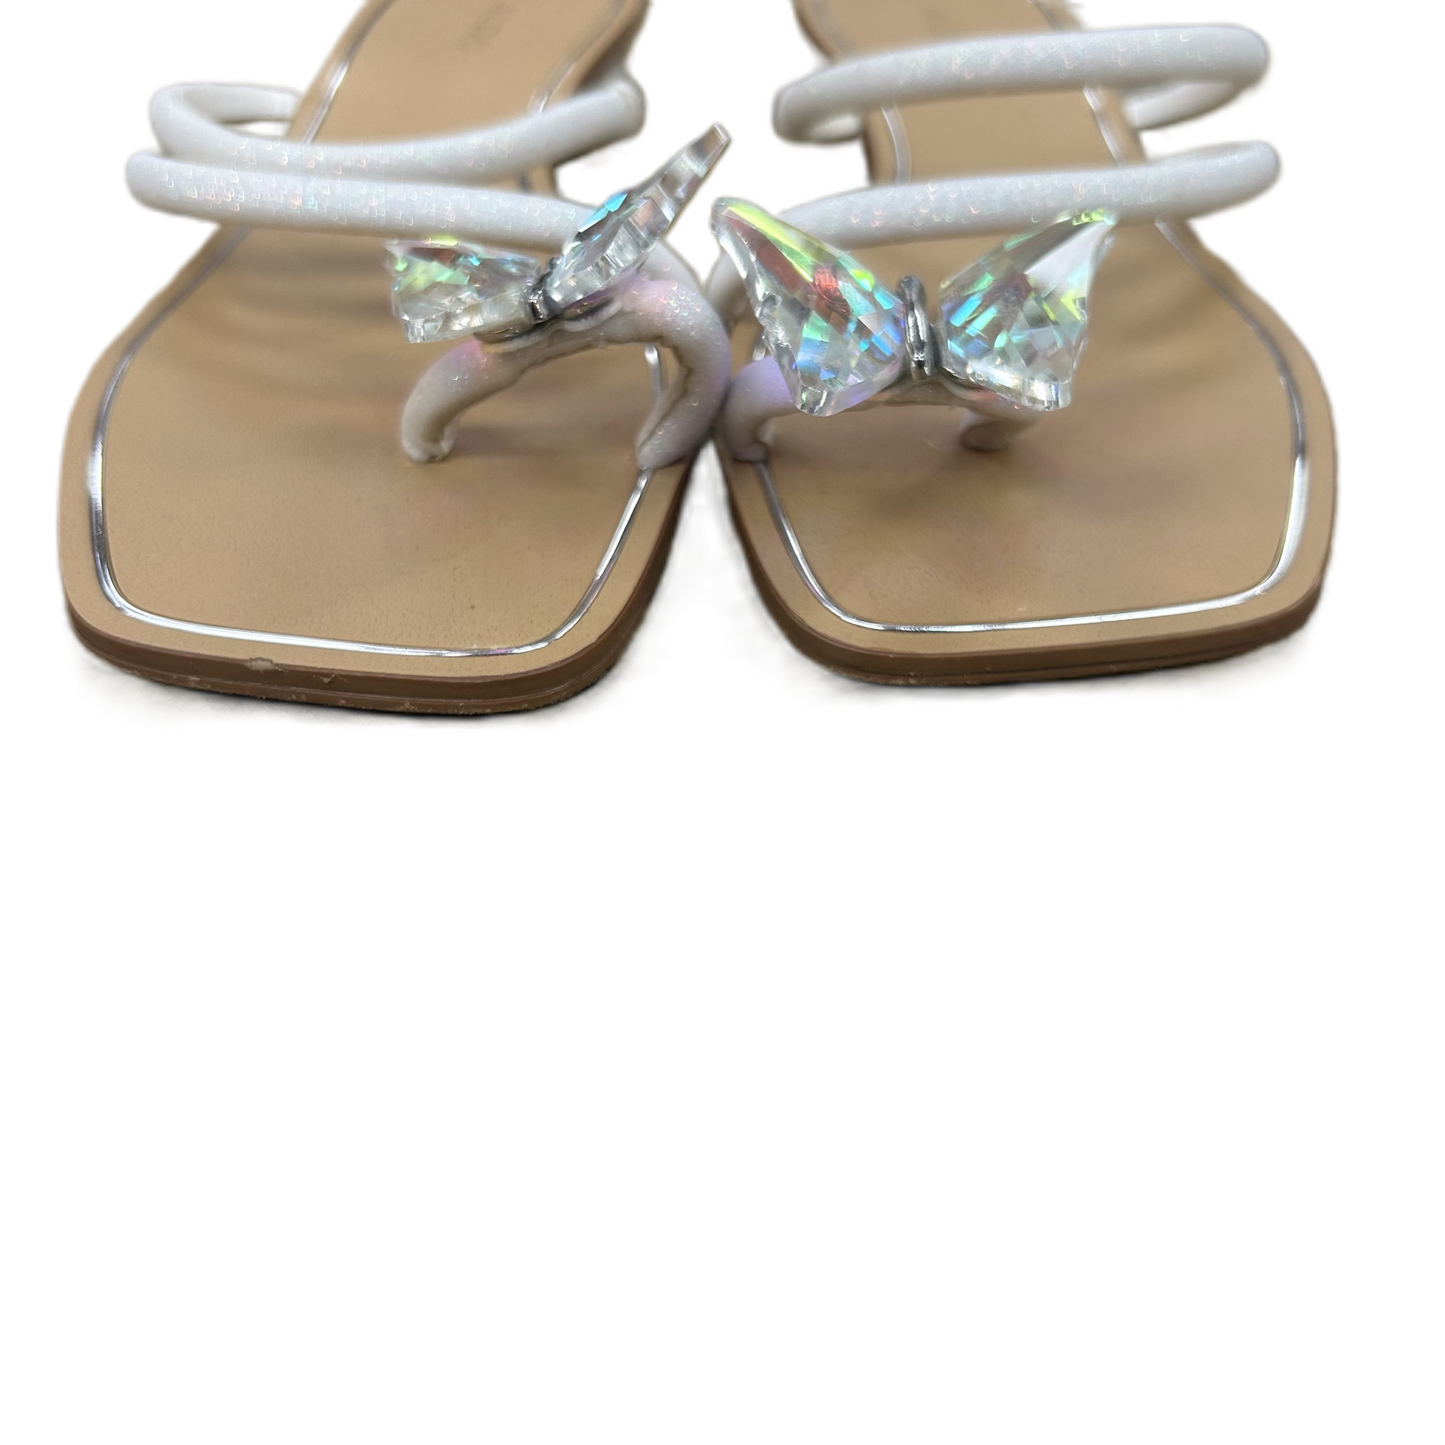 White Sandals Flats By Aldo, Size: 9